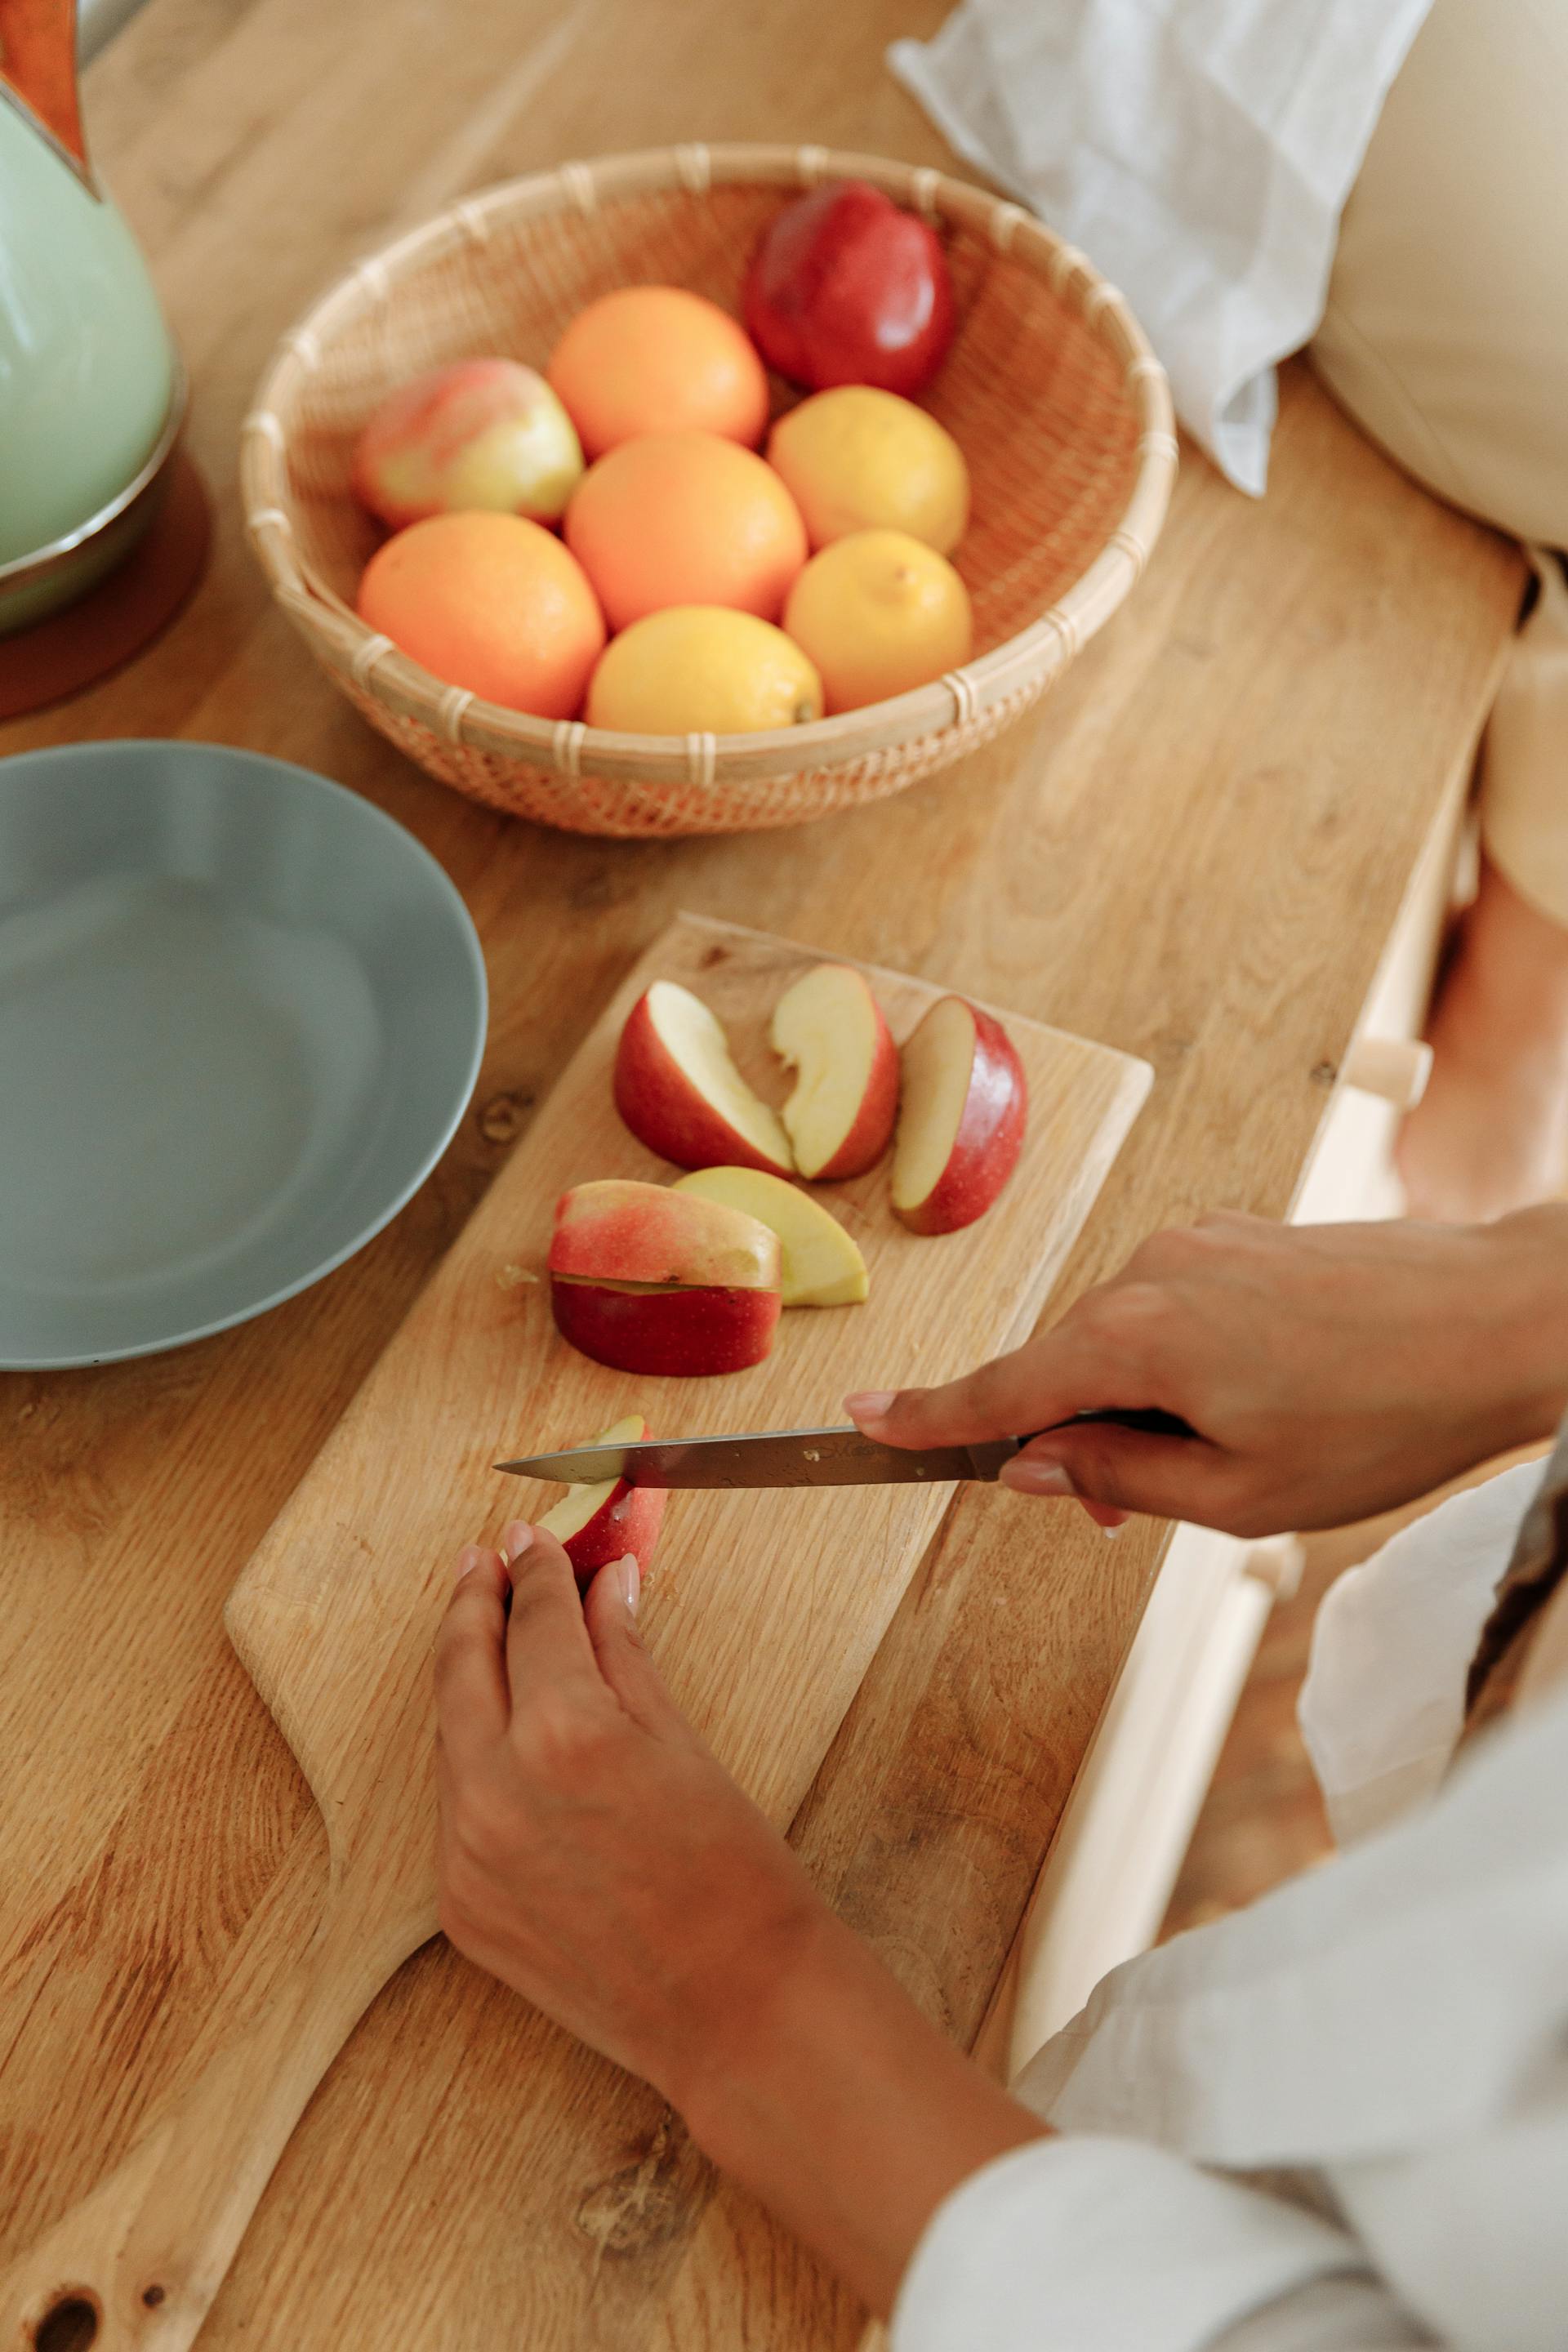 A person cutting up apples | Source: Pexels